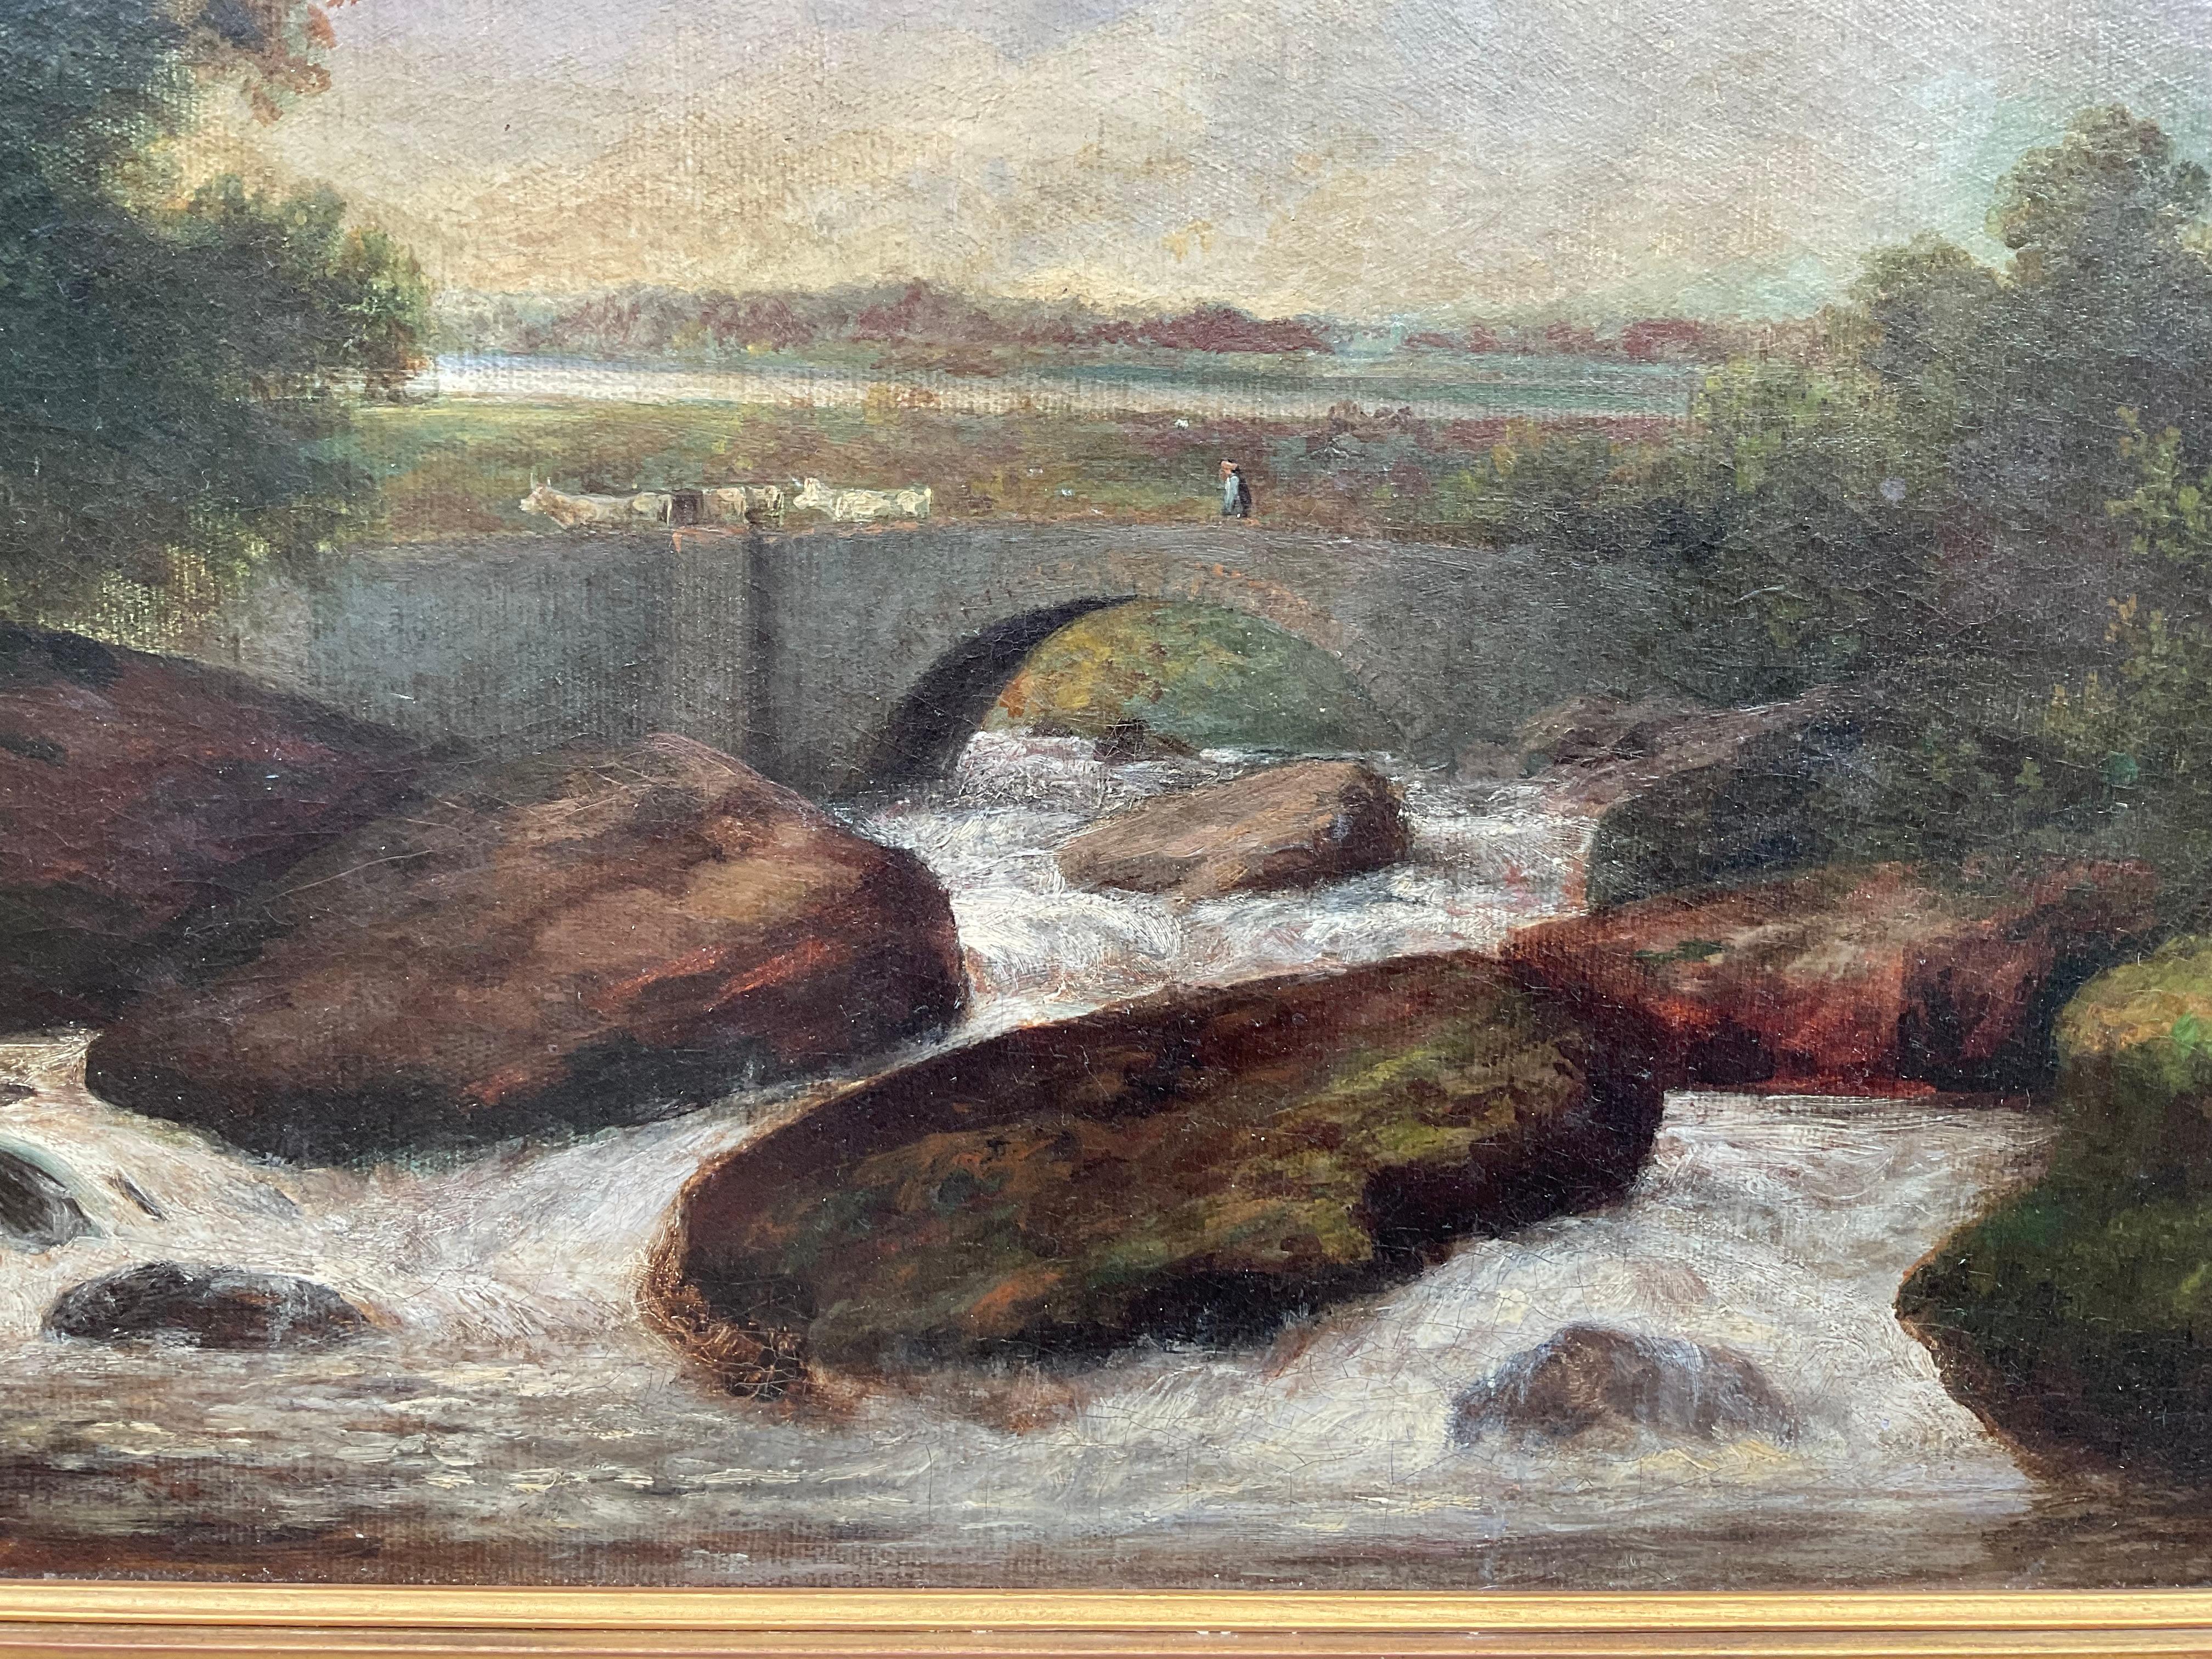 Wood 19 Century Scottish Or English River Landscape Oil Painting For Sale